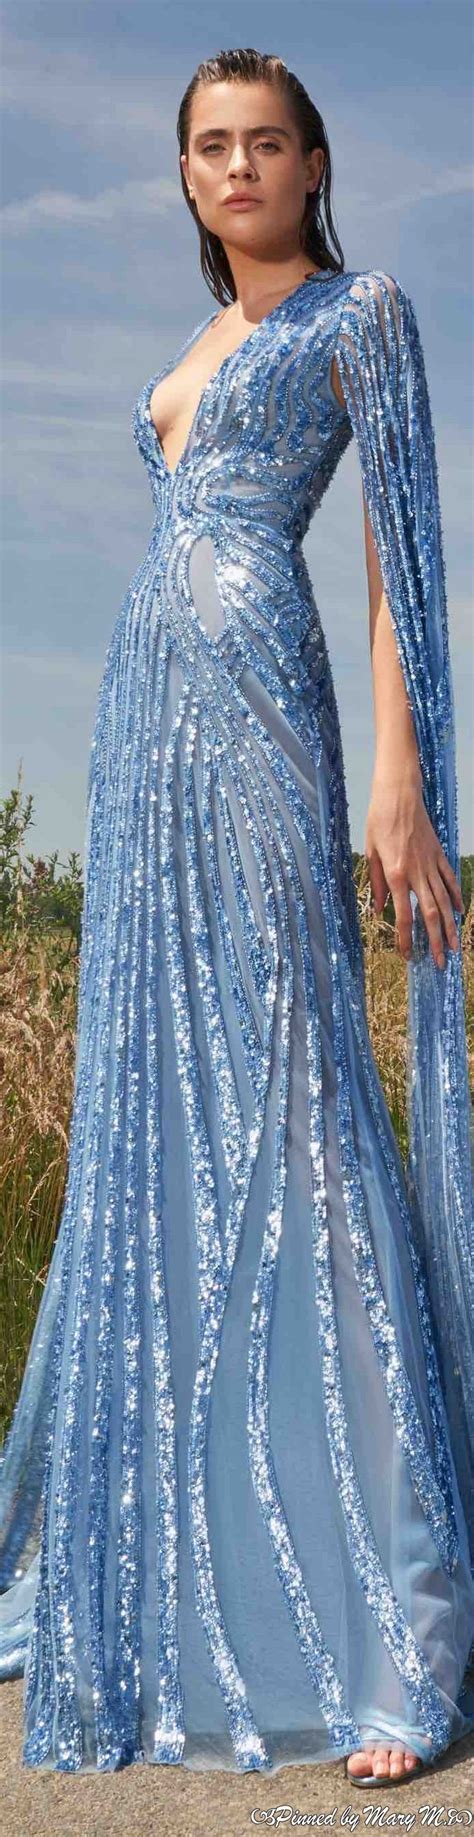 Zuhair Murad Resort 2023 Fashion Fashion Gowns Couture Dresses